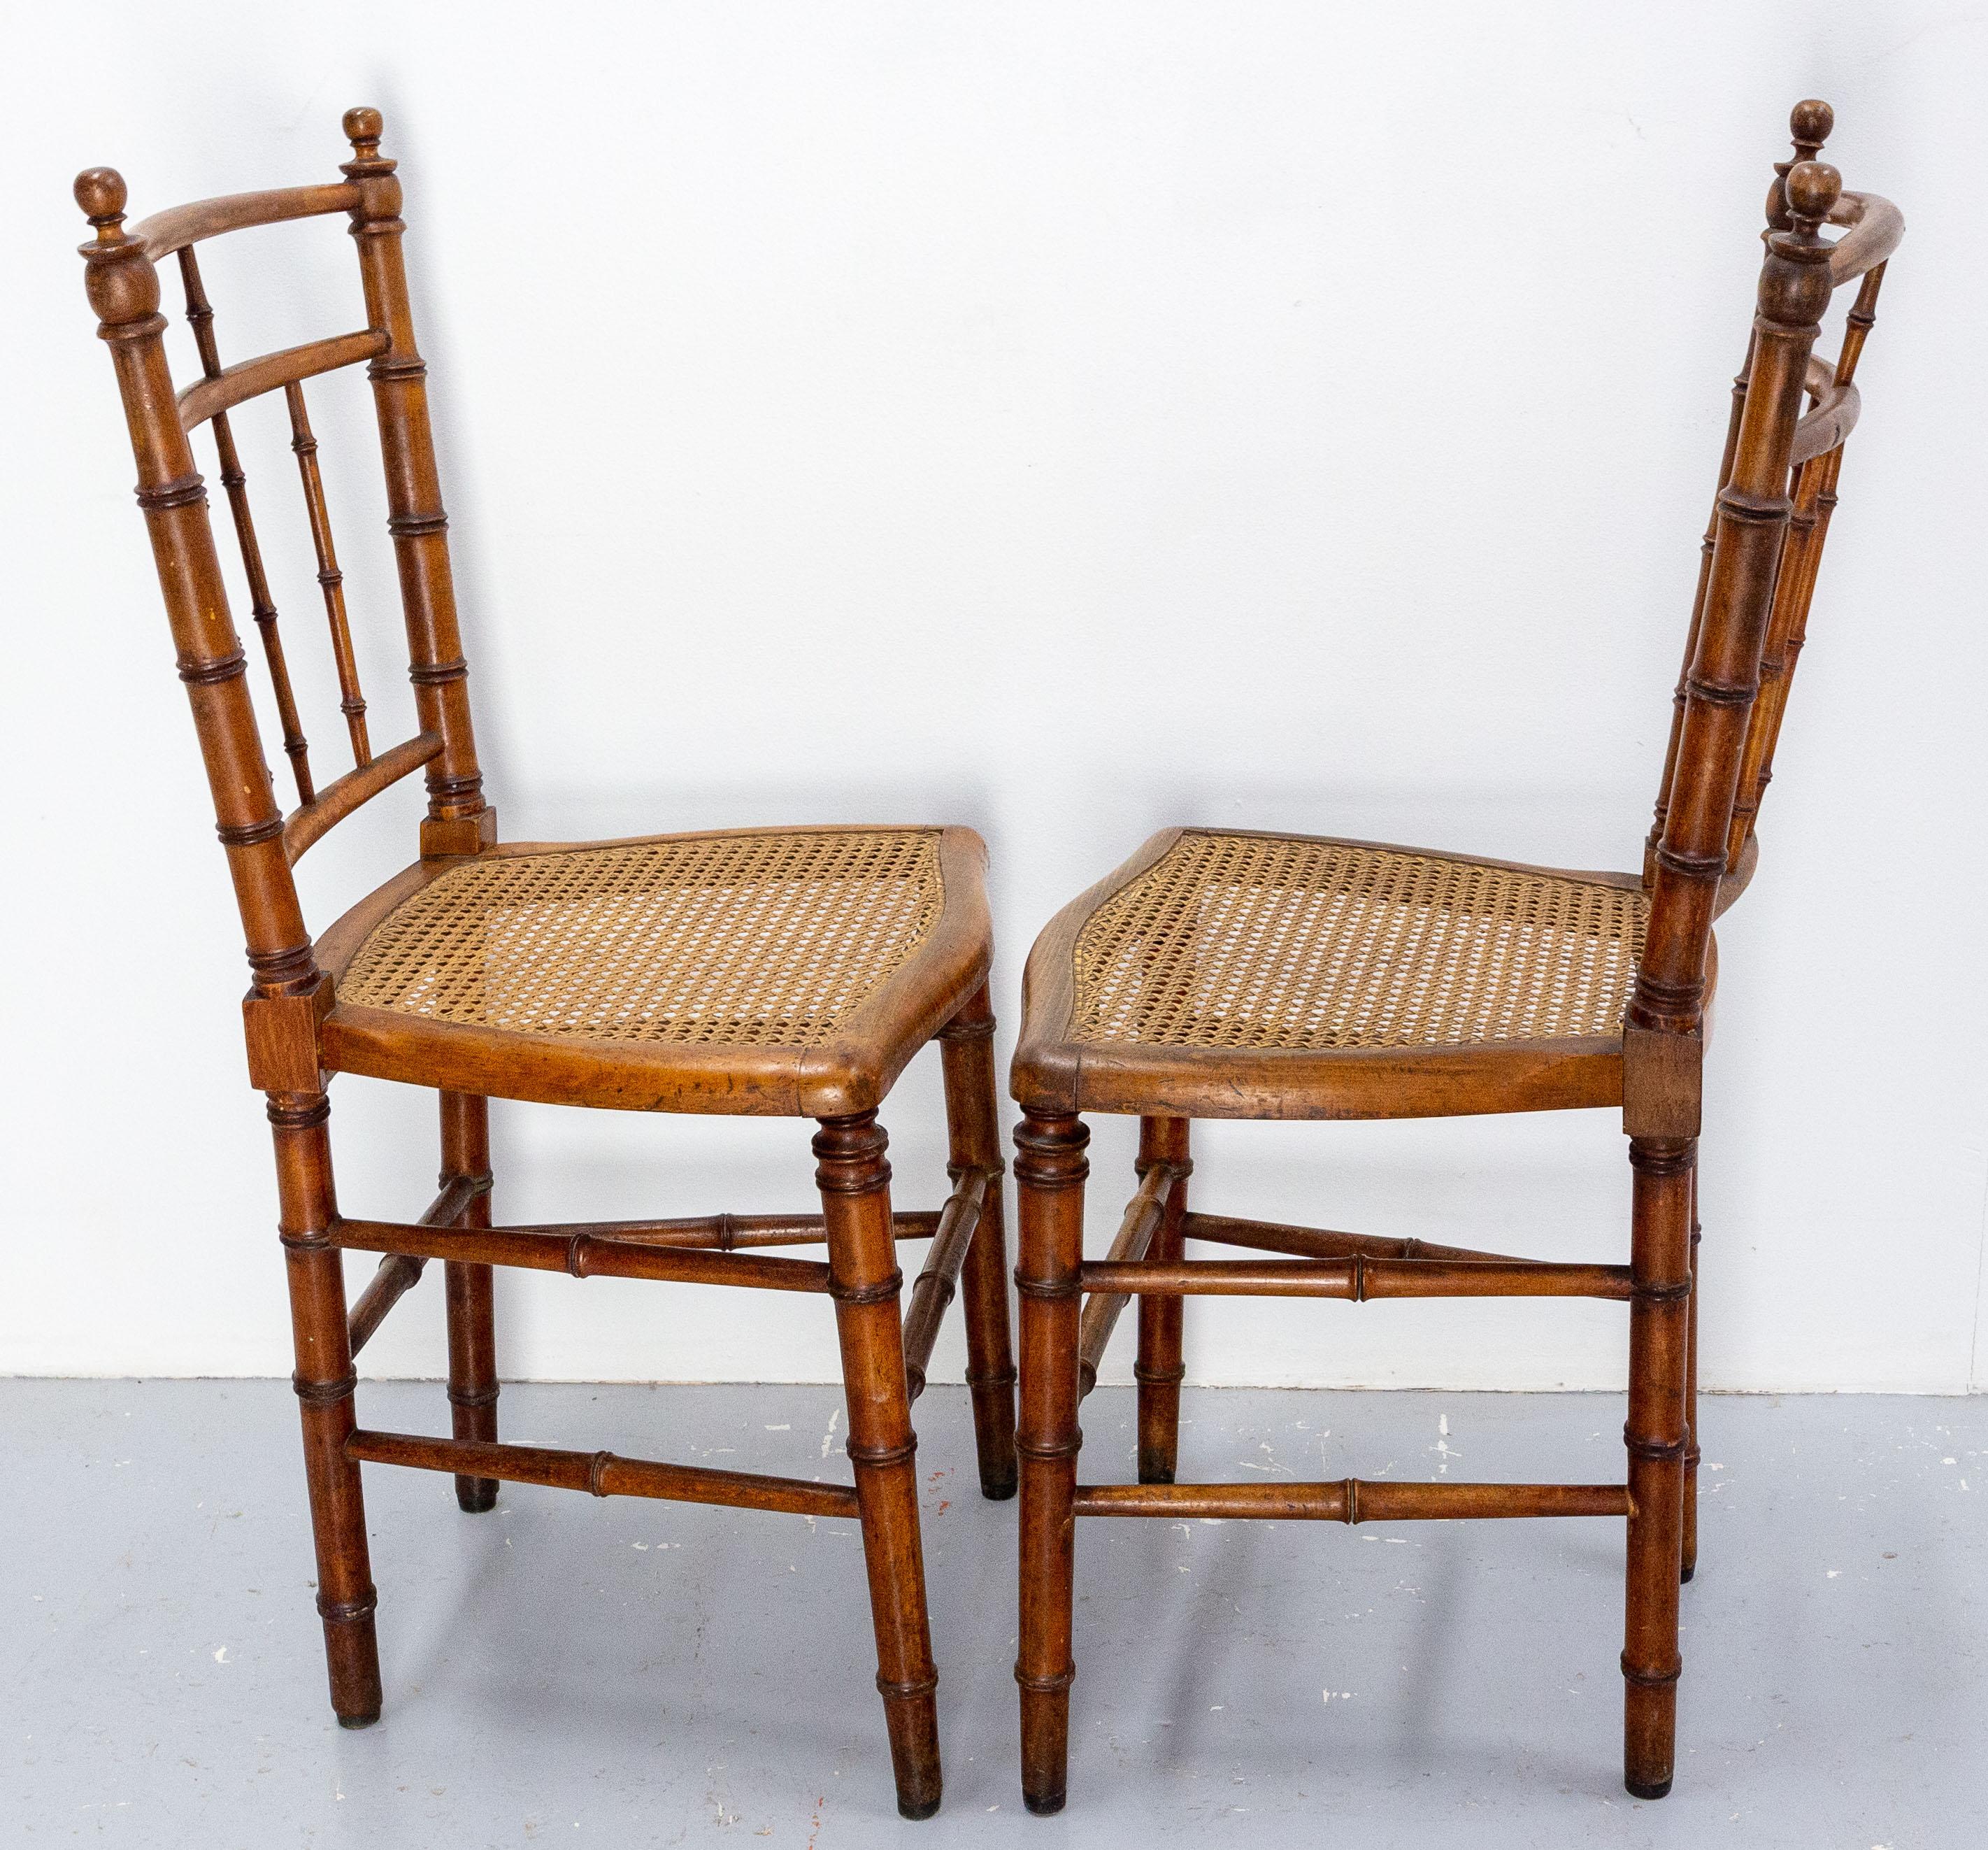 Two Napoleon III Caned Beech Chairs, French, Late 19th Century For Sale 5